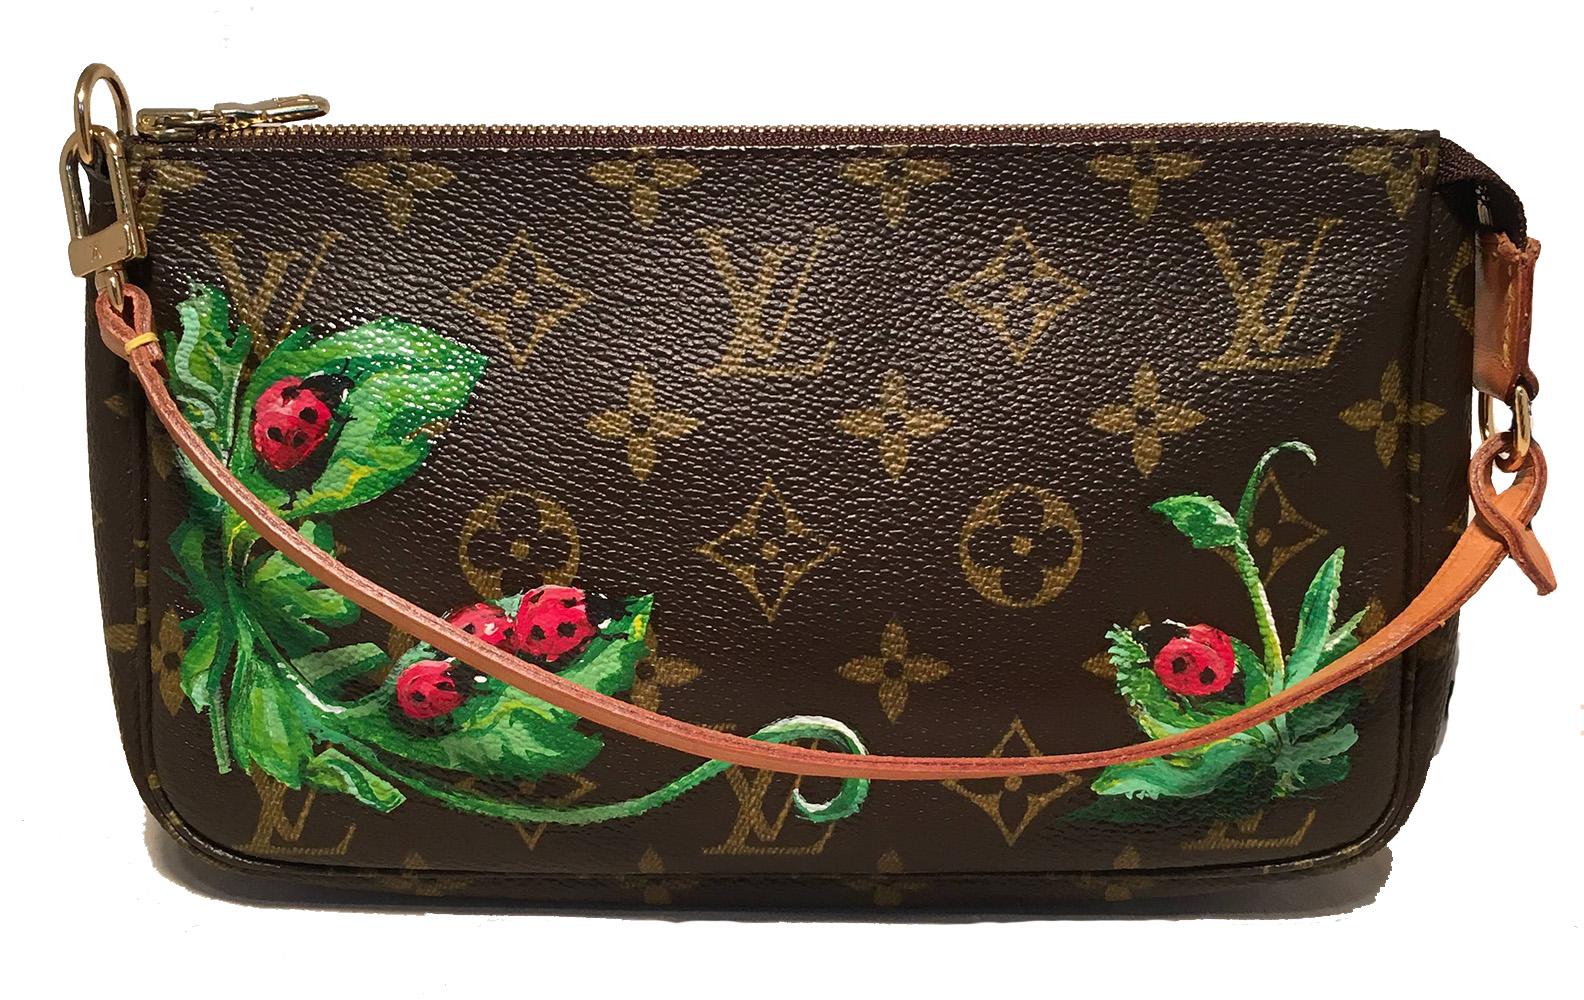 Louis Vuitton Vintage Hand Painted Ladybug Monogram accessories Pouch in excellent condition. Signature monogram canvas exterior trimmed with tan lather and gold hardware. Monogram canvas has been customized by our in-house artist with adorable hand